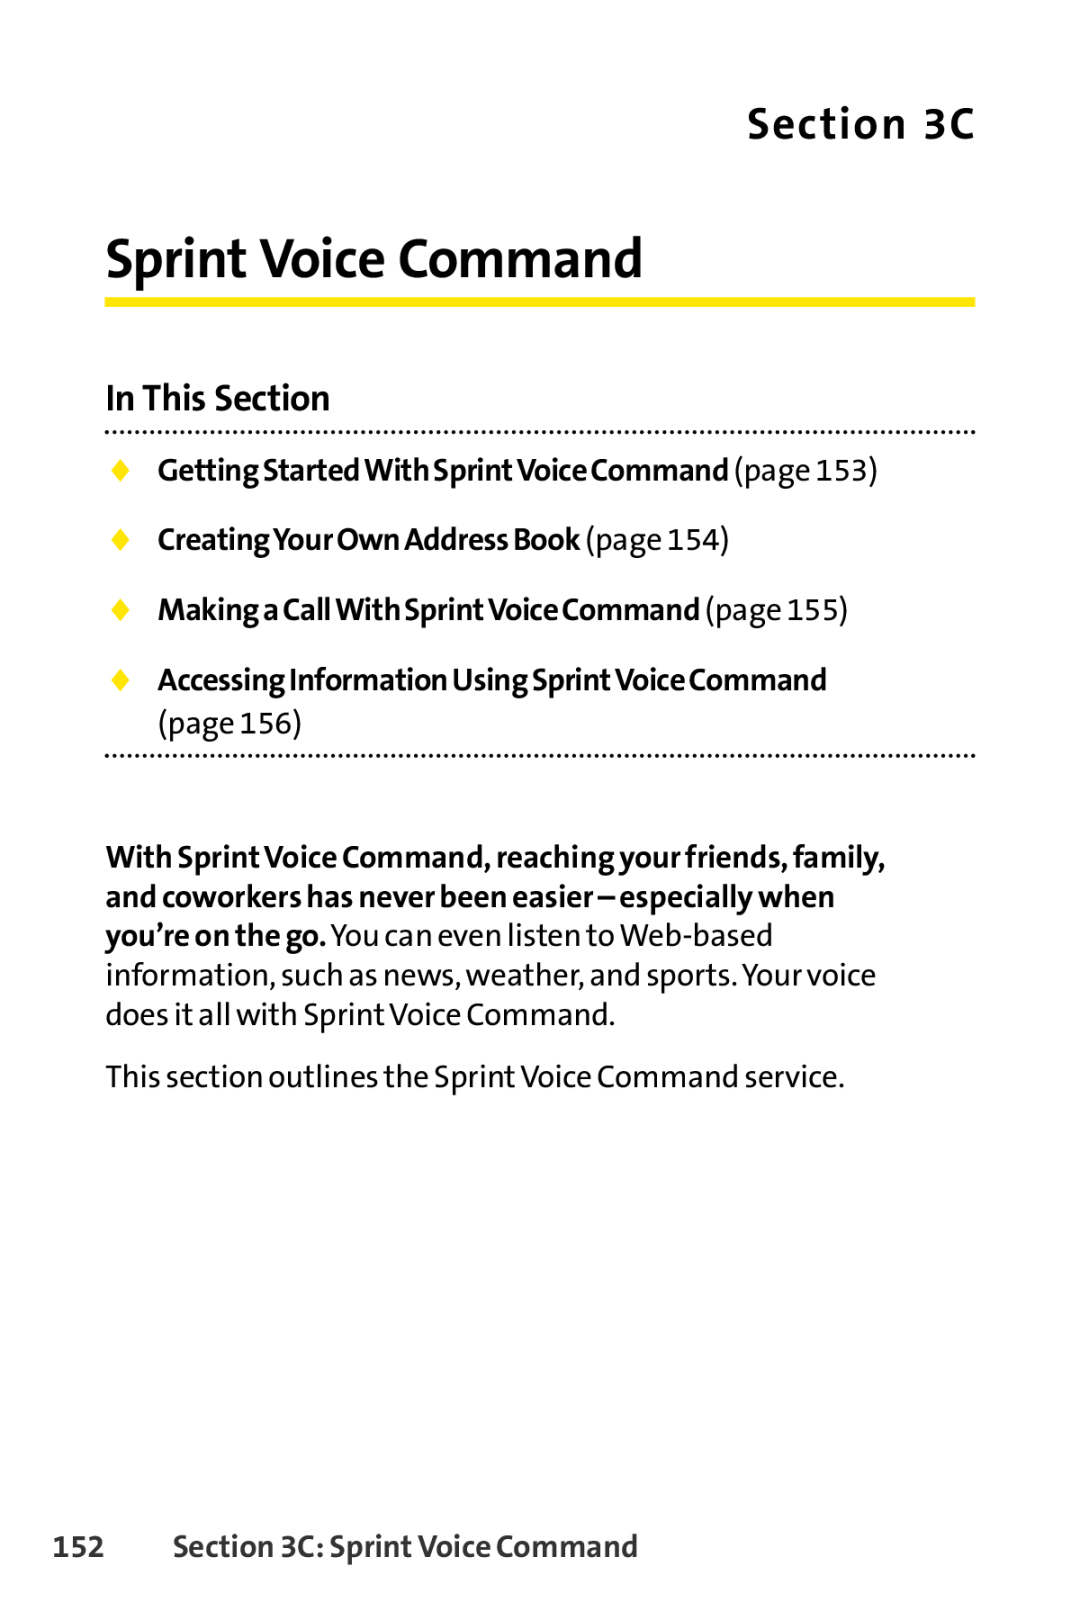 Sprint Nextel LX160 Sprint Voice Command,  GettingStartedWithSprintVoiceCommand page,  CreatingYourOwnAddressBook page 